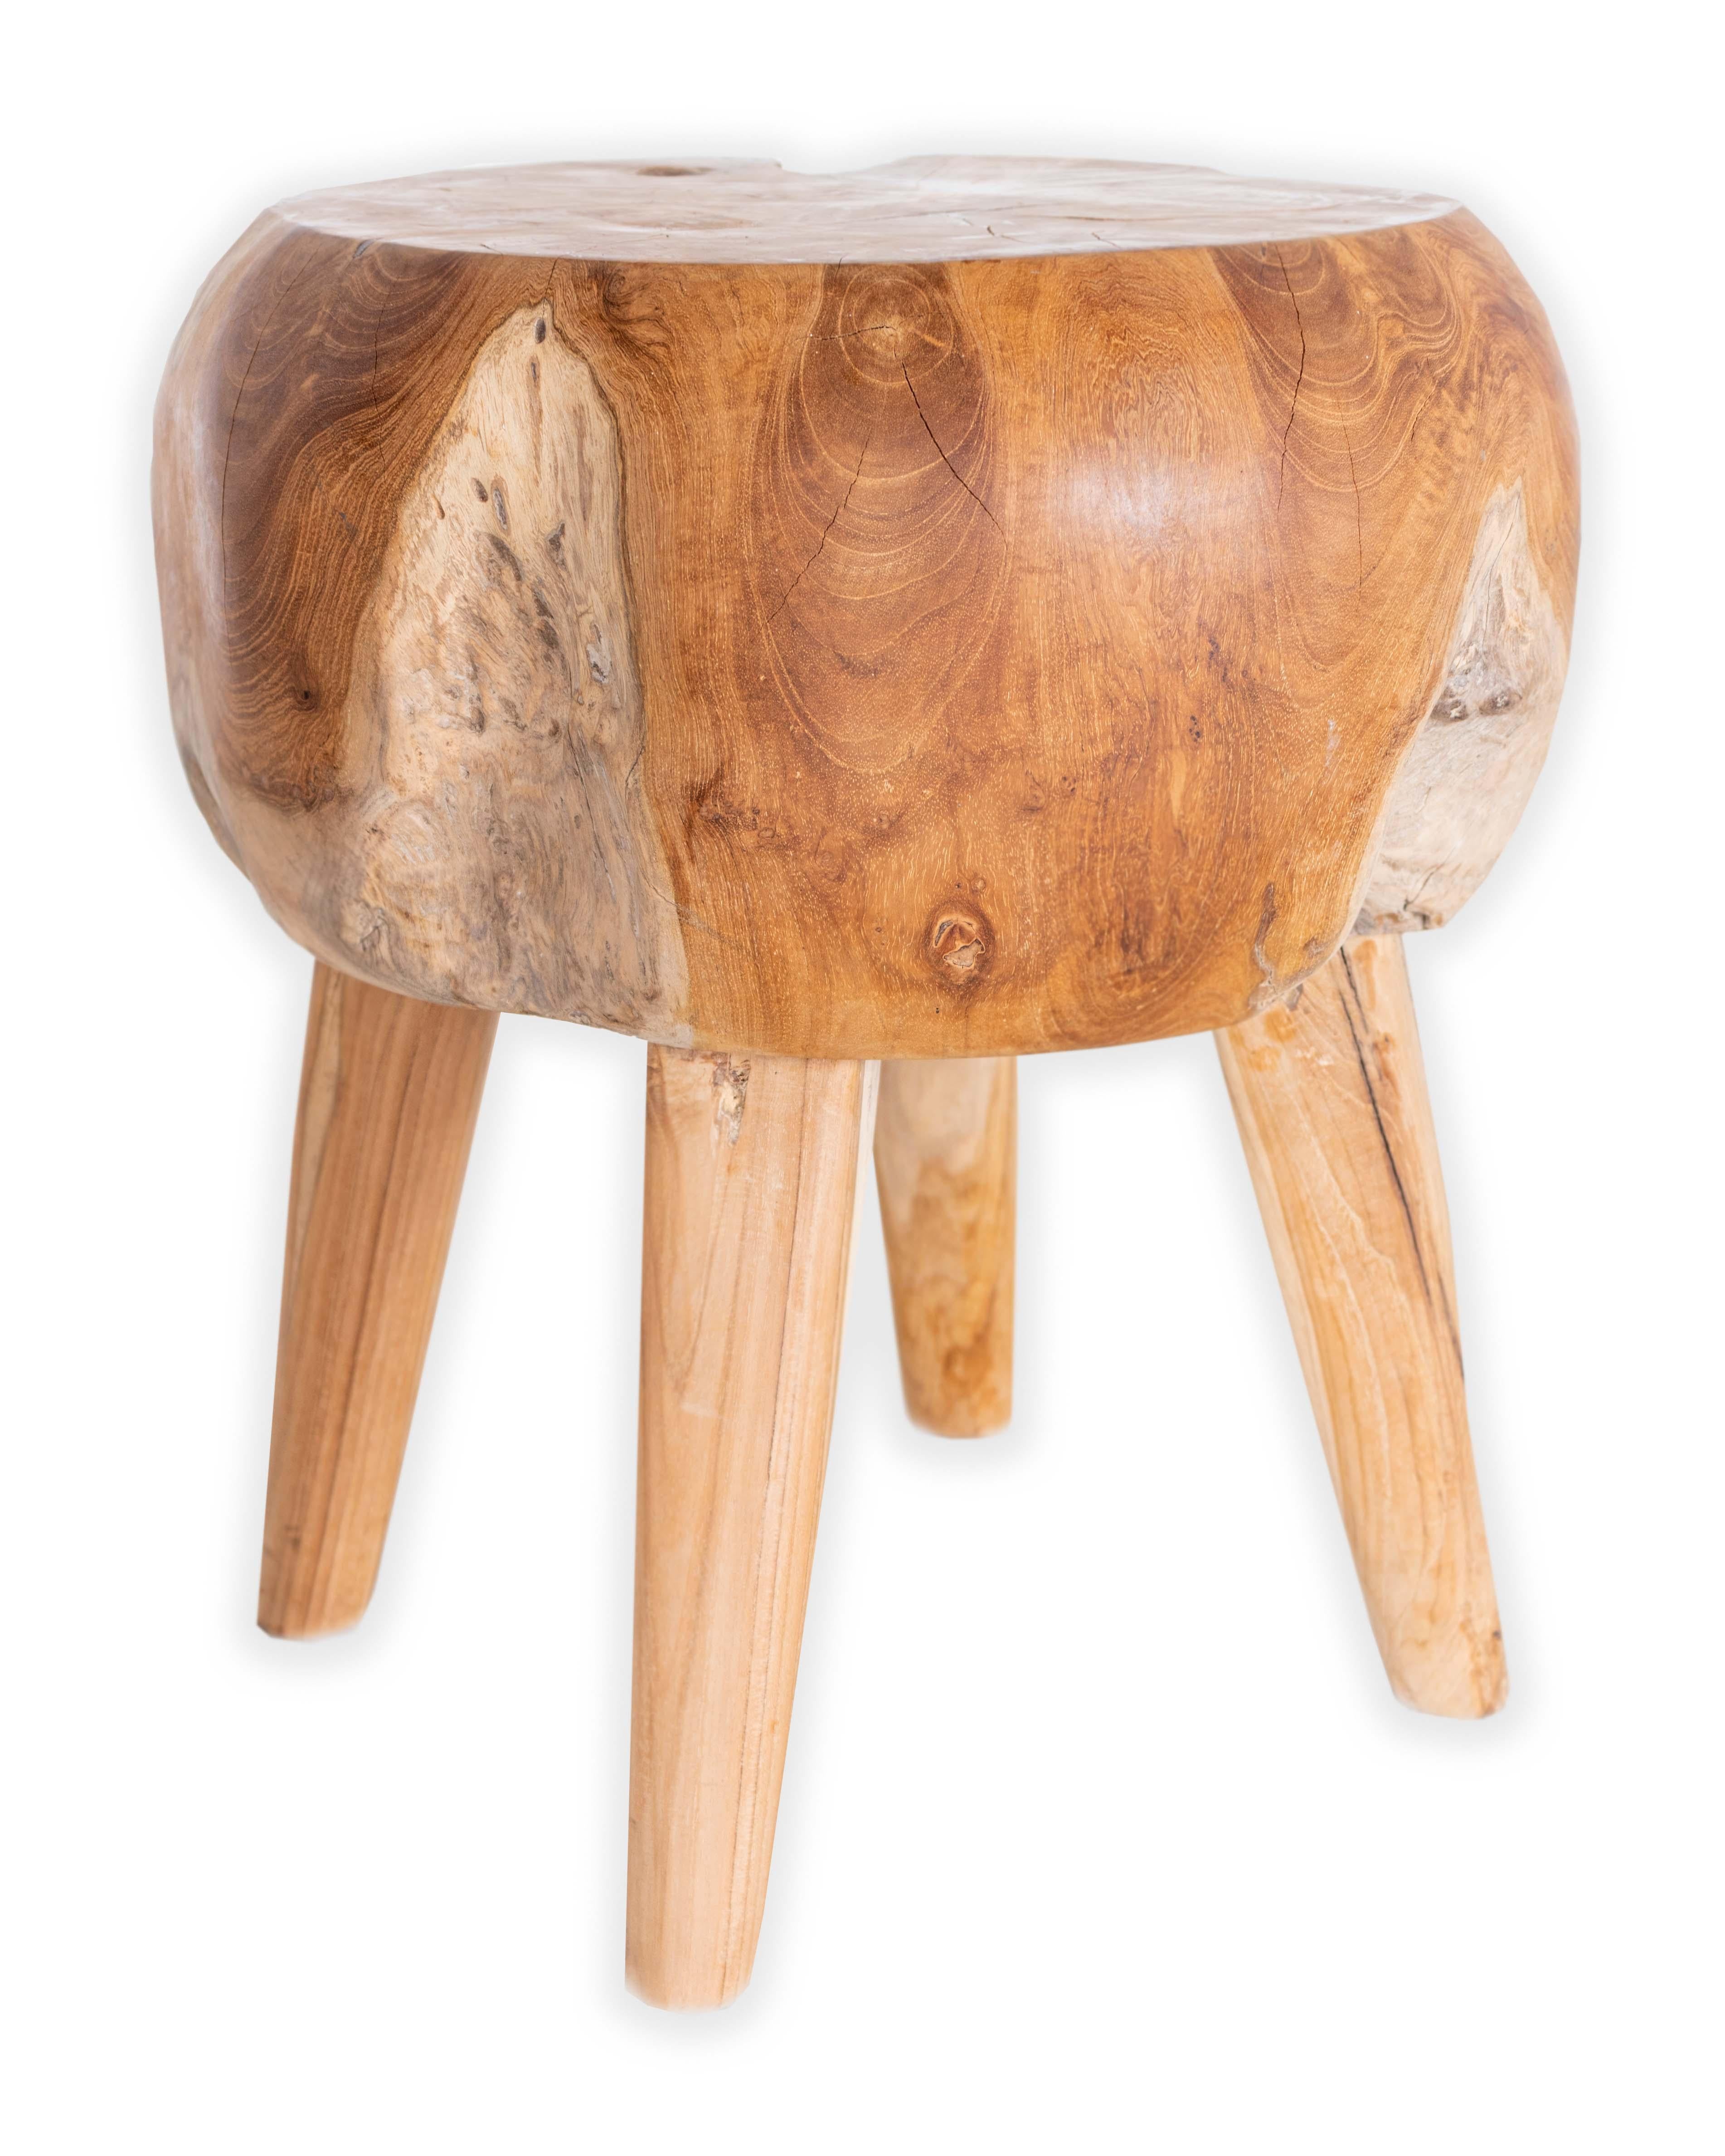 Rustic wooden end table/stool. 

Piece from our one of a kind Le Monde collection. Exclusive to Brendan Bass. 

